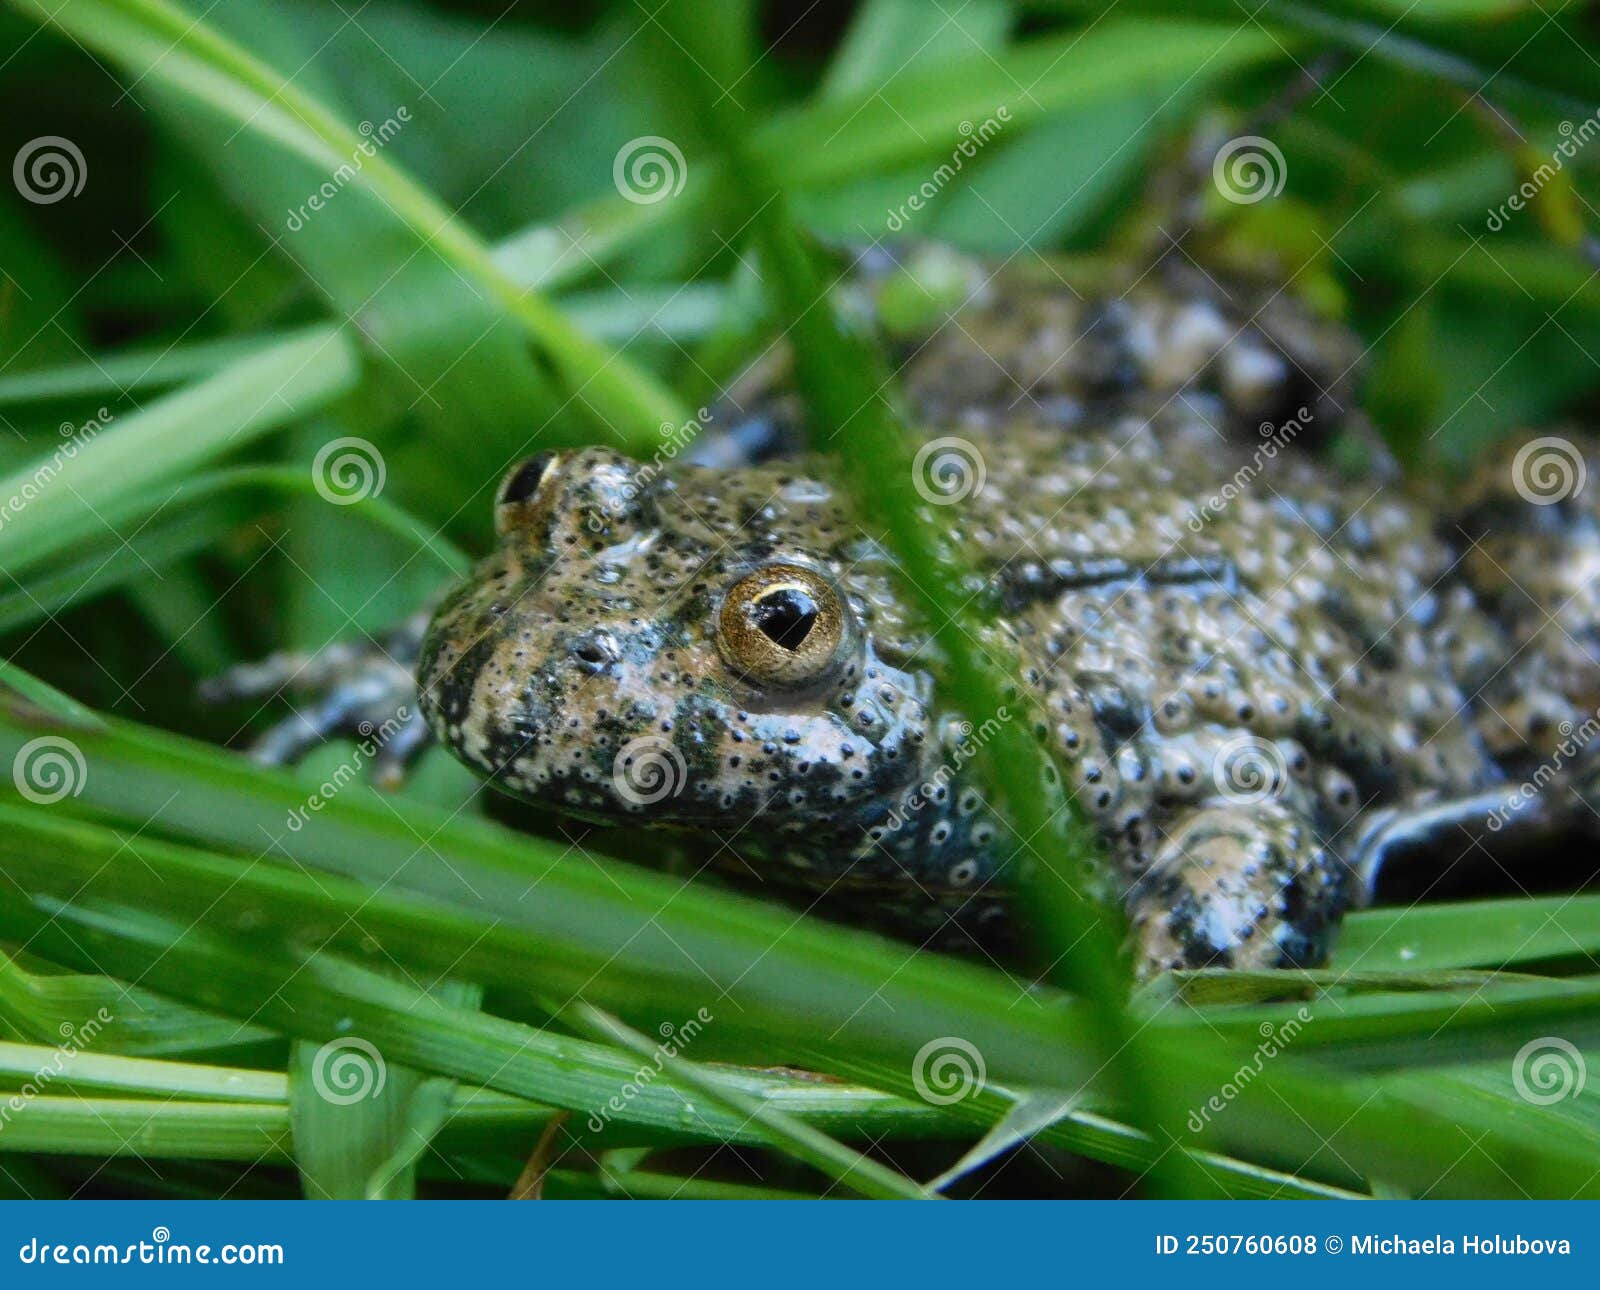 Fire belly toad in a trap stock photo. Image of beauty - 250760608